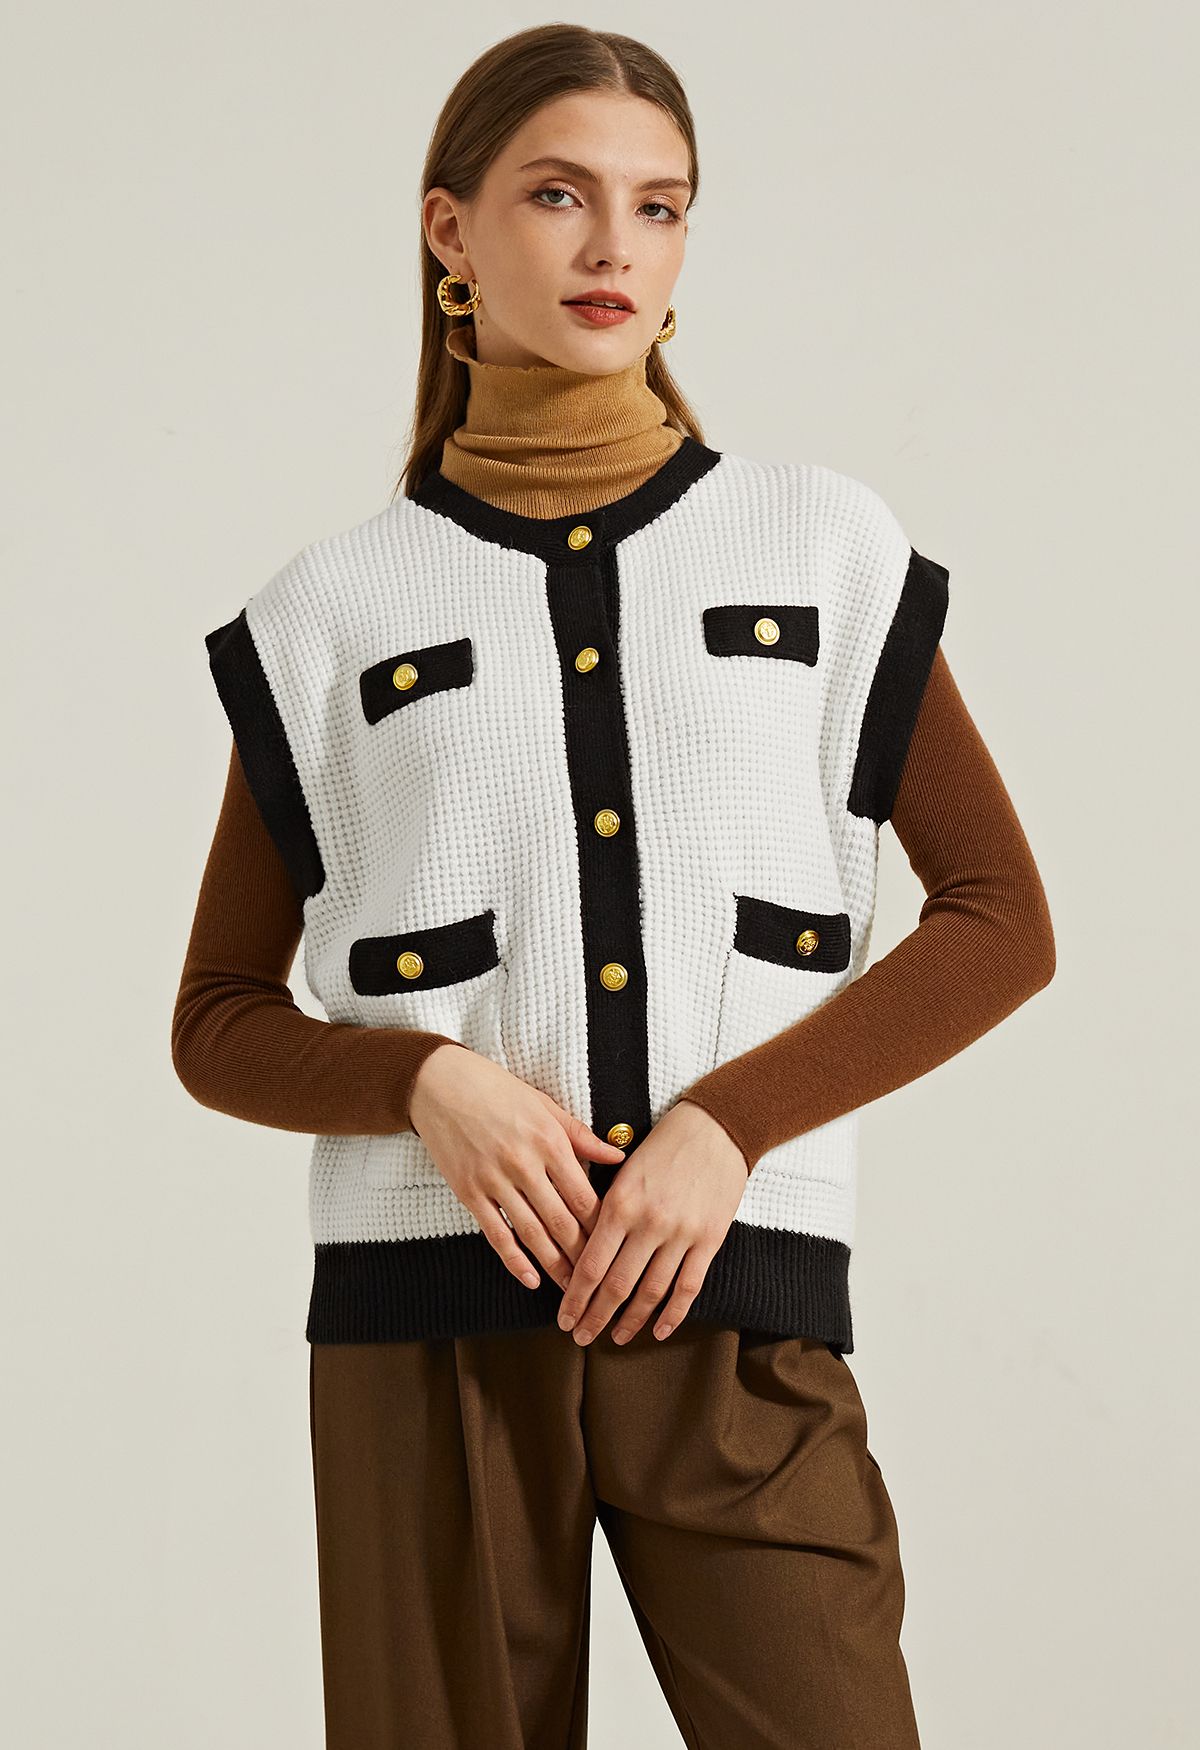 Contrast Edge Button Embellished Knit Vest in White